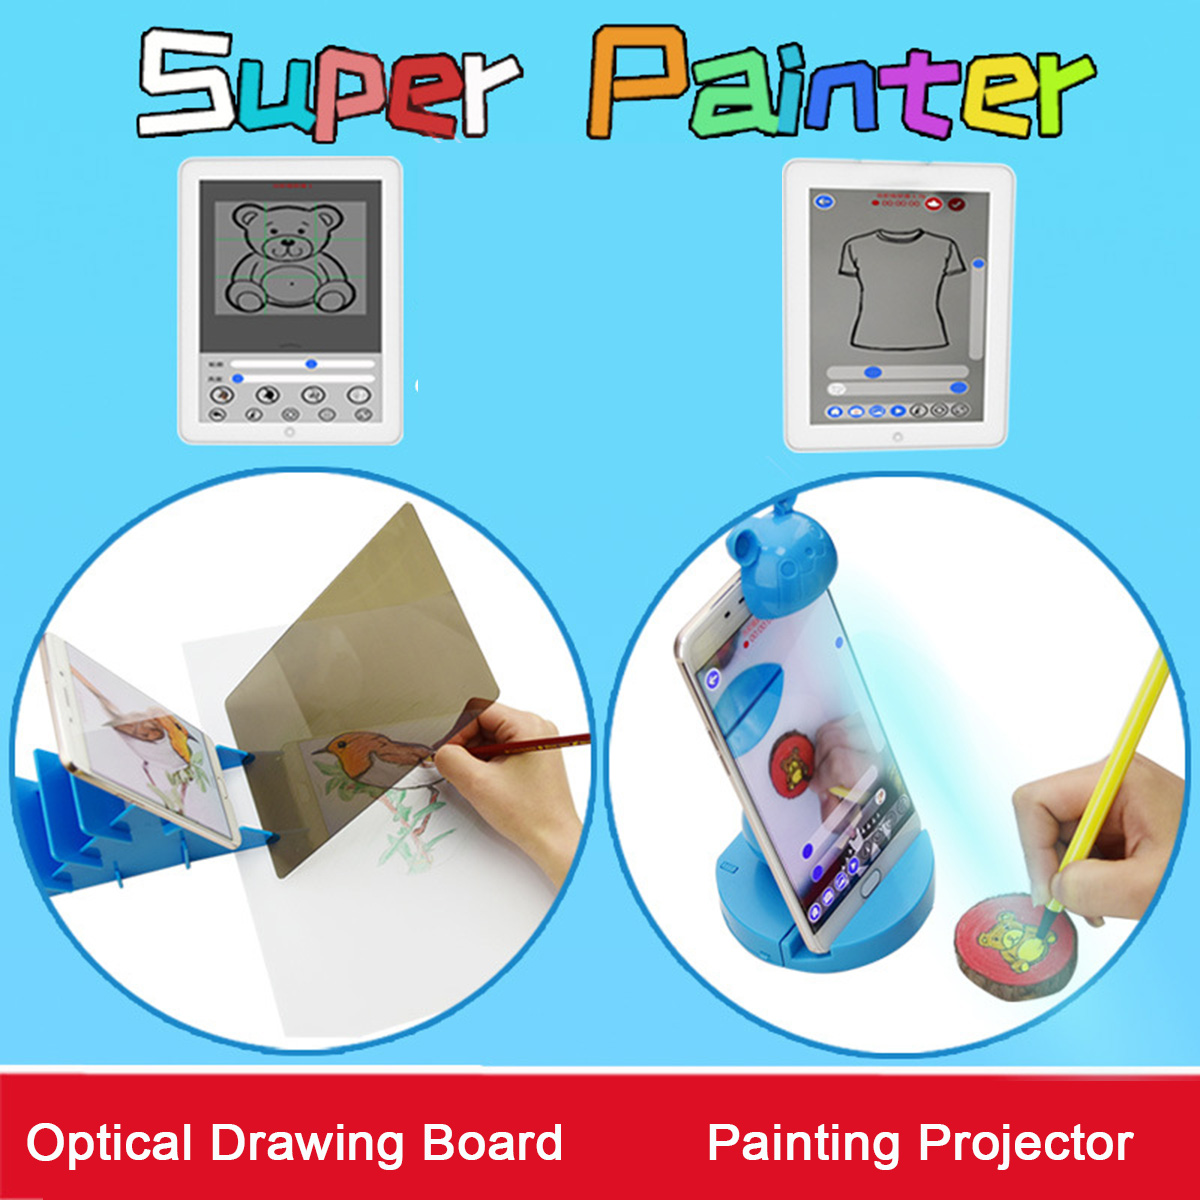 Kids-Children-Optical-Drawing-Tracing-Board-Sketch-Drawing-Mobile-Projector-Painting-1632467-2